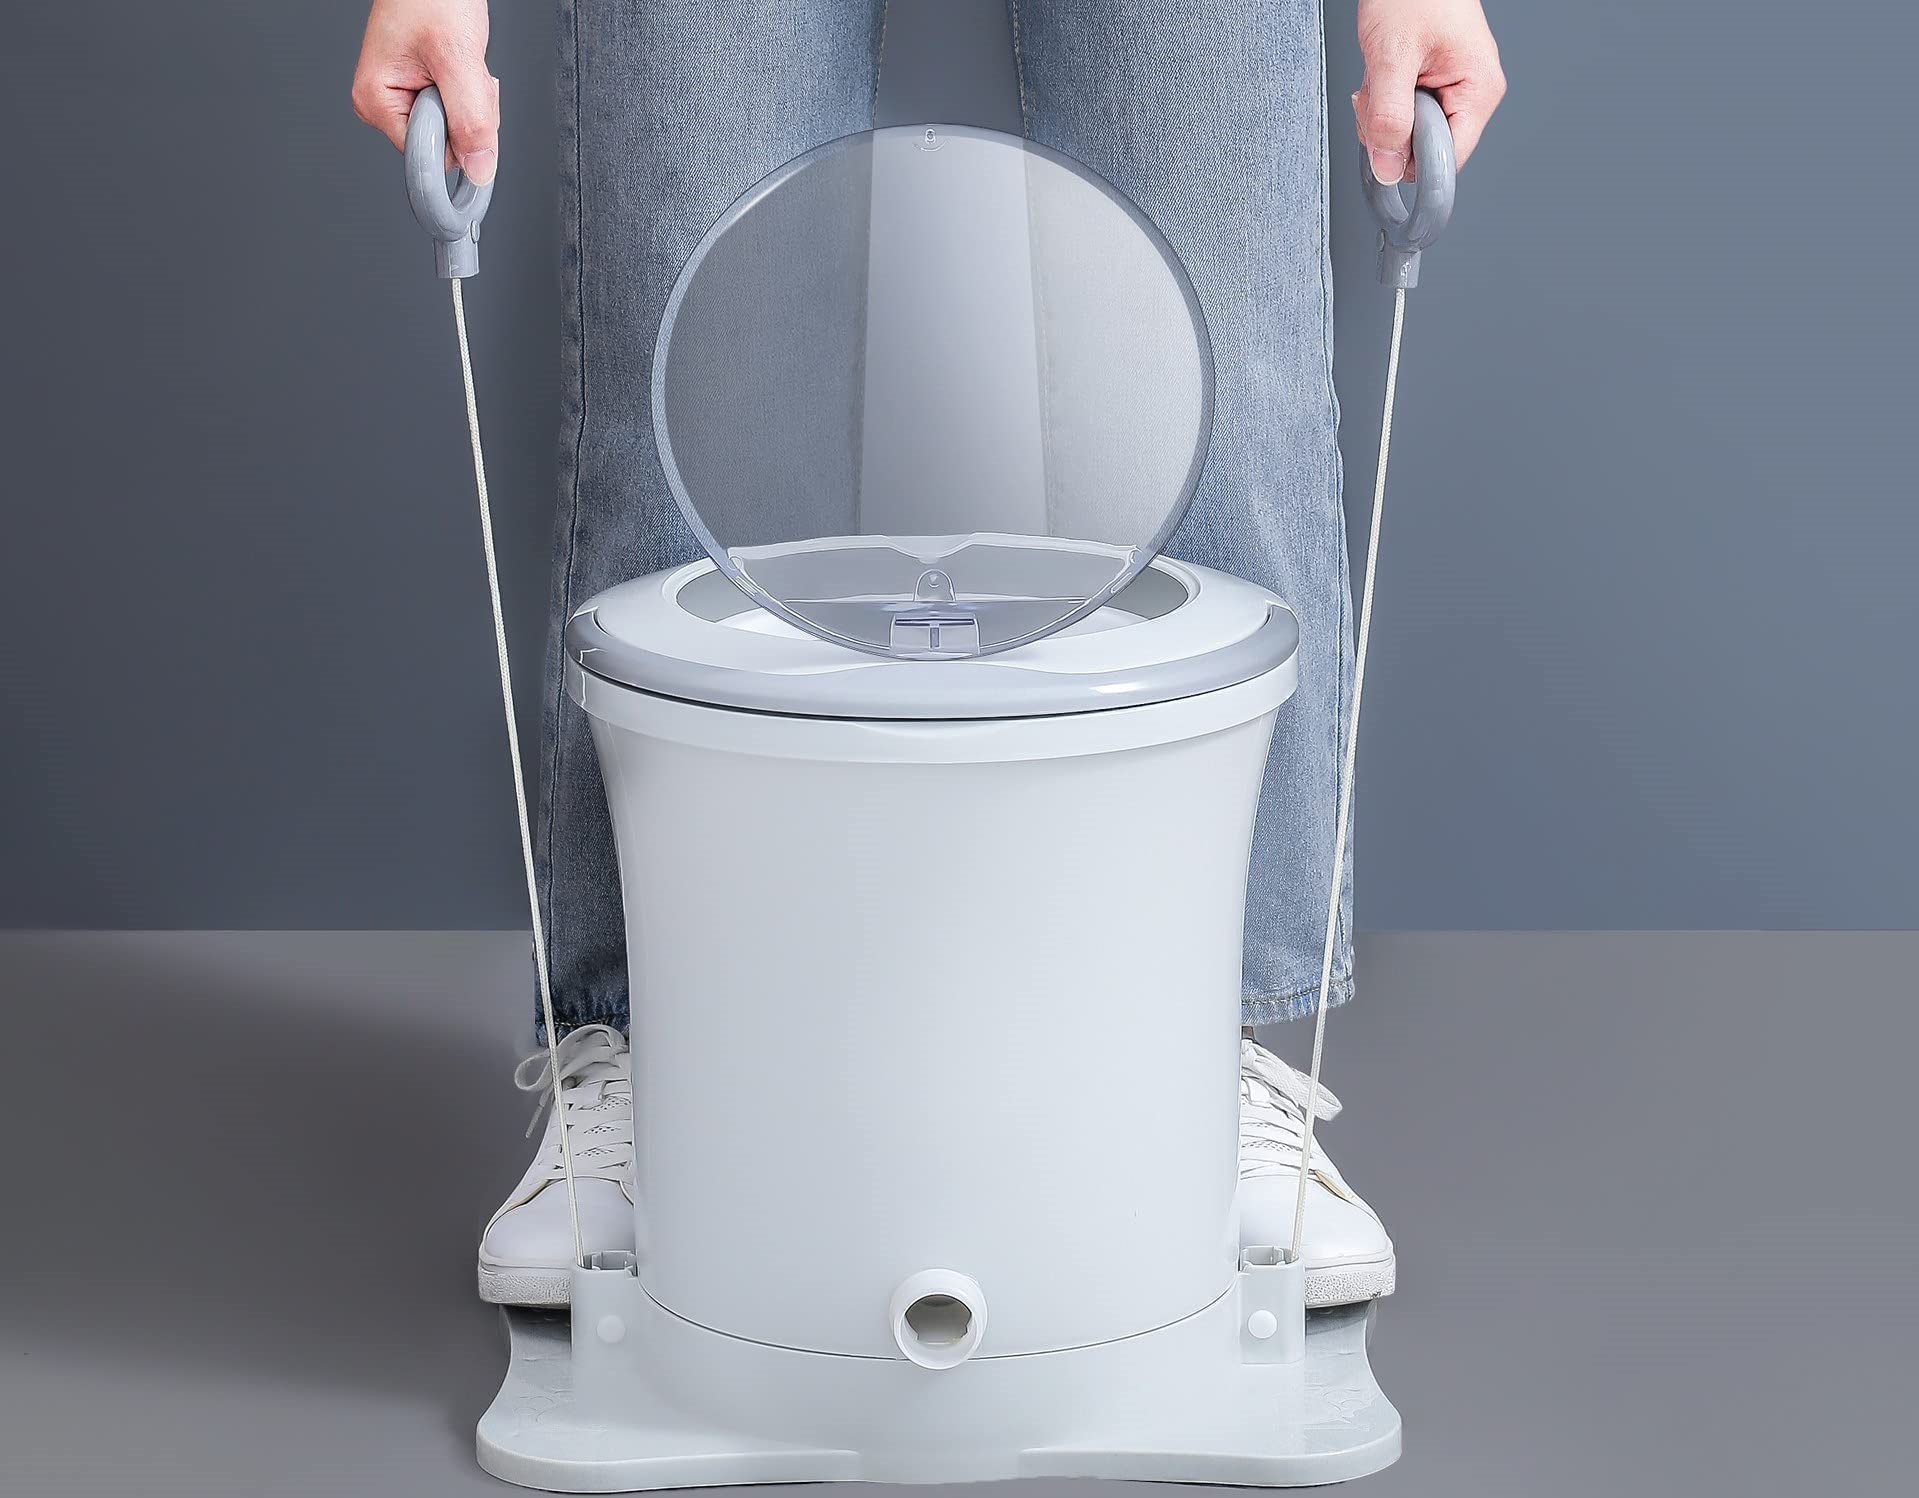 15 Incredible Manual Clothes Washer For 2023